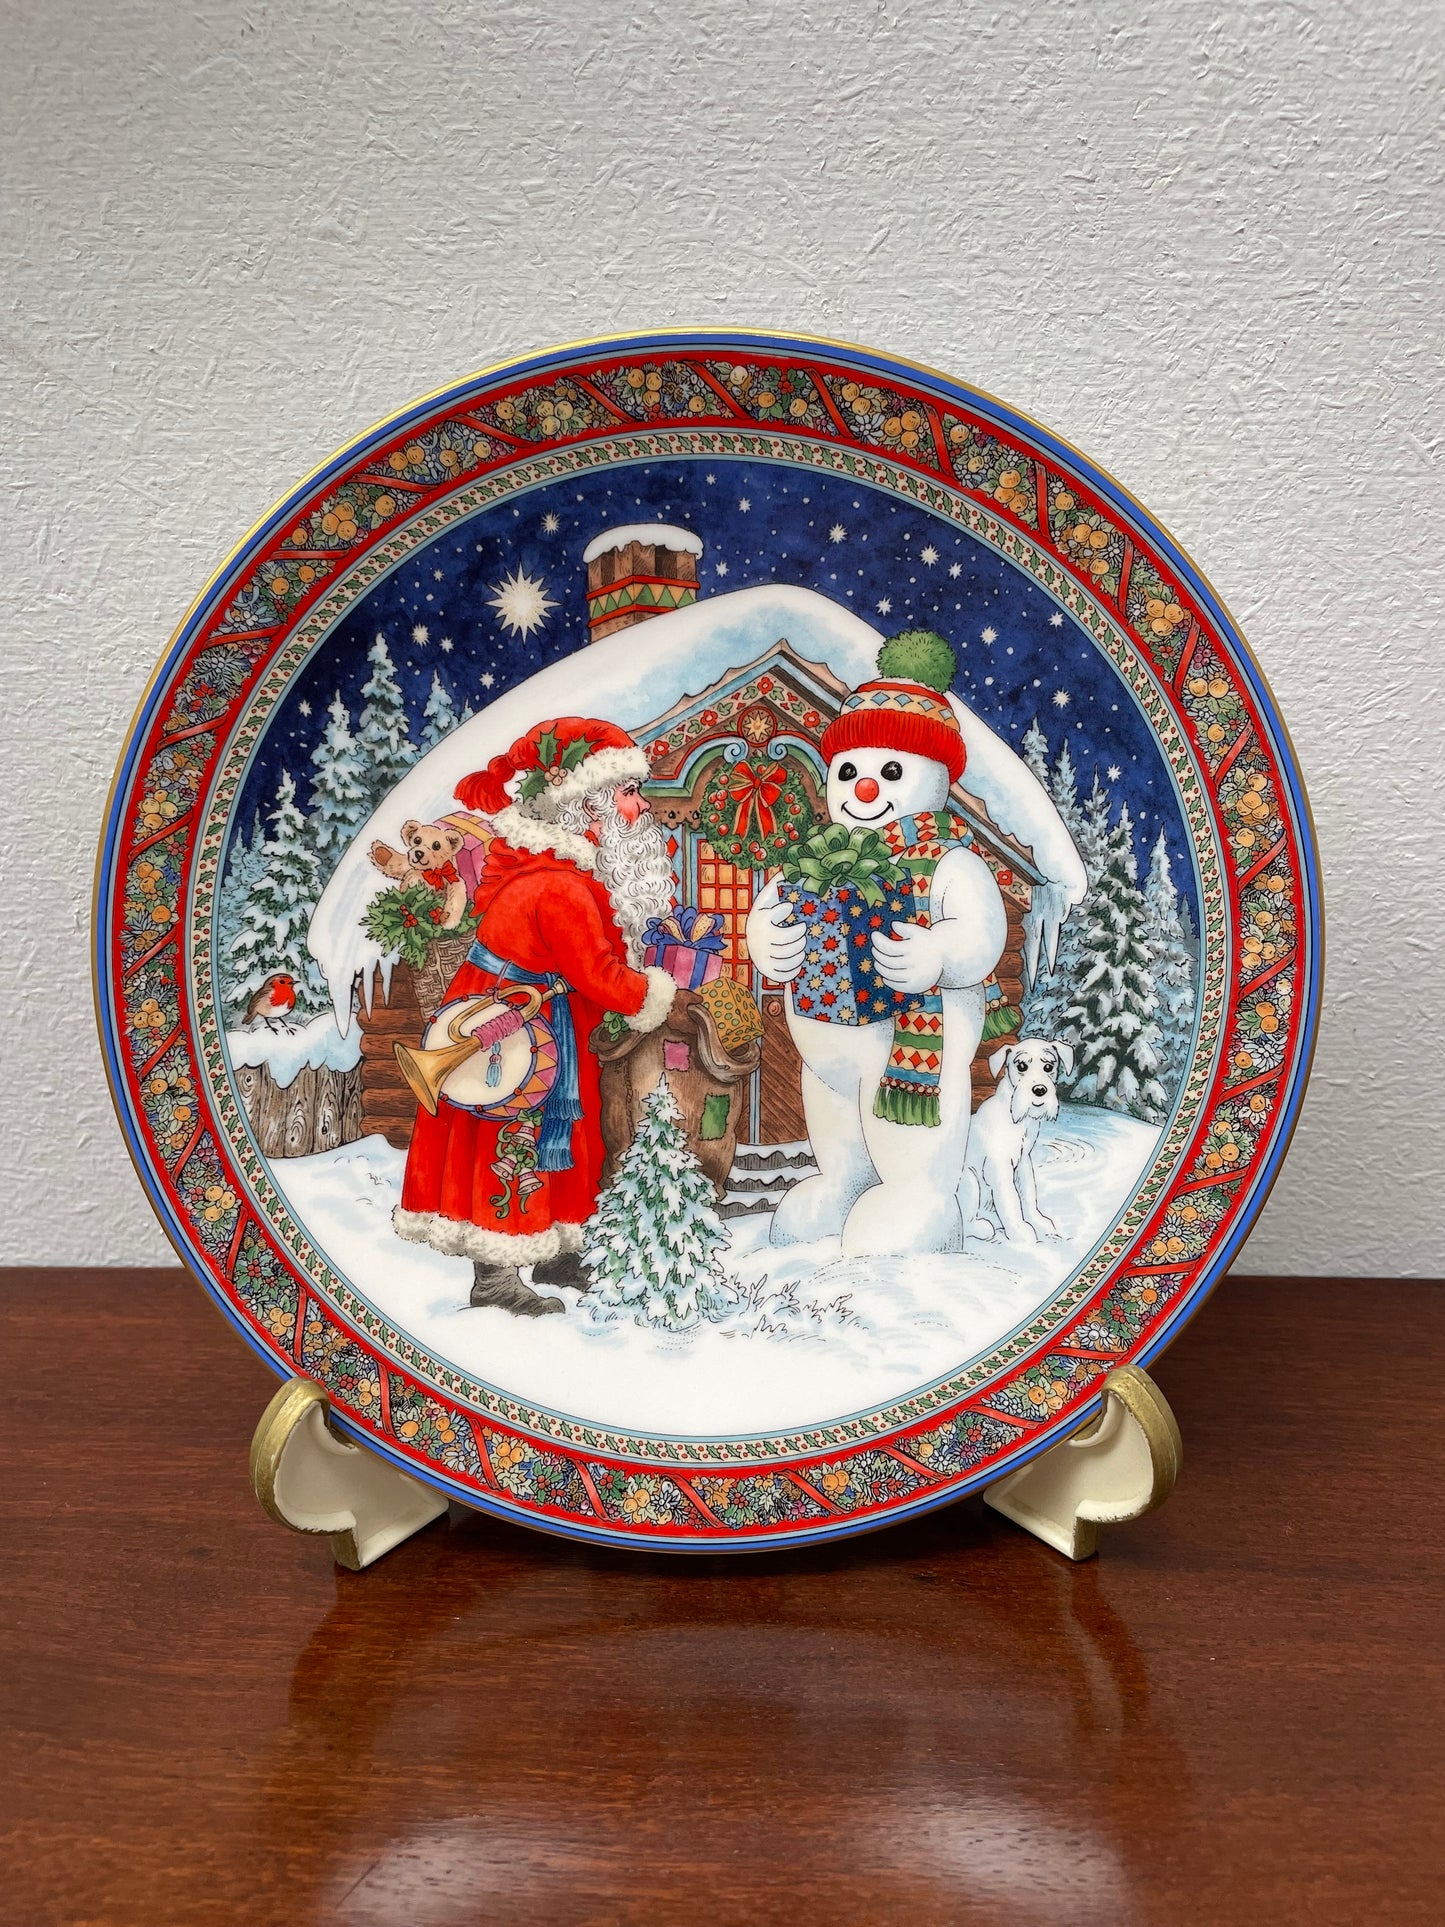 Royal Worcester Christmas Plate "Santa And The Snowman"